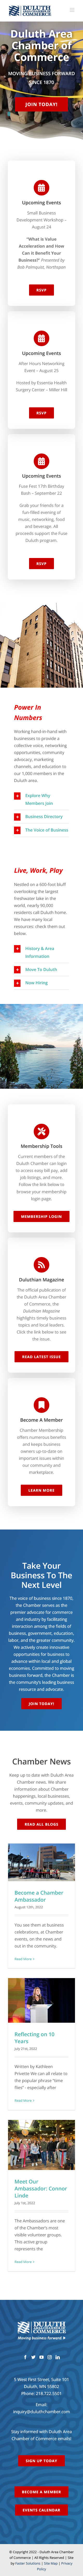 Duluth Area Chamber of Commerce - Mobile